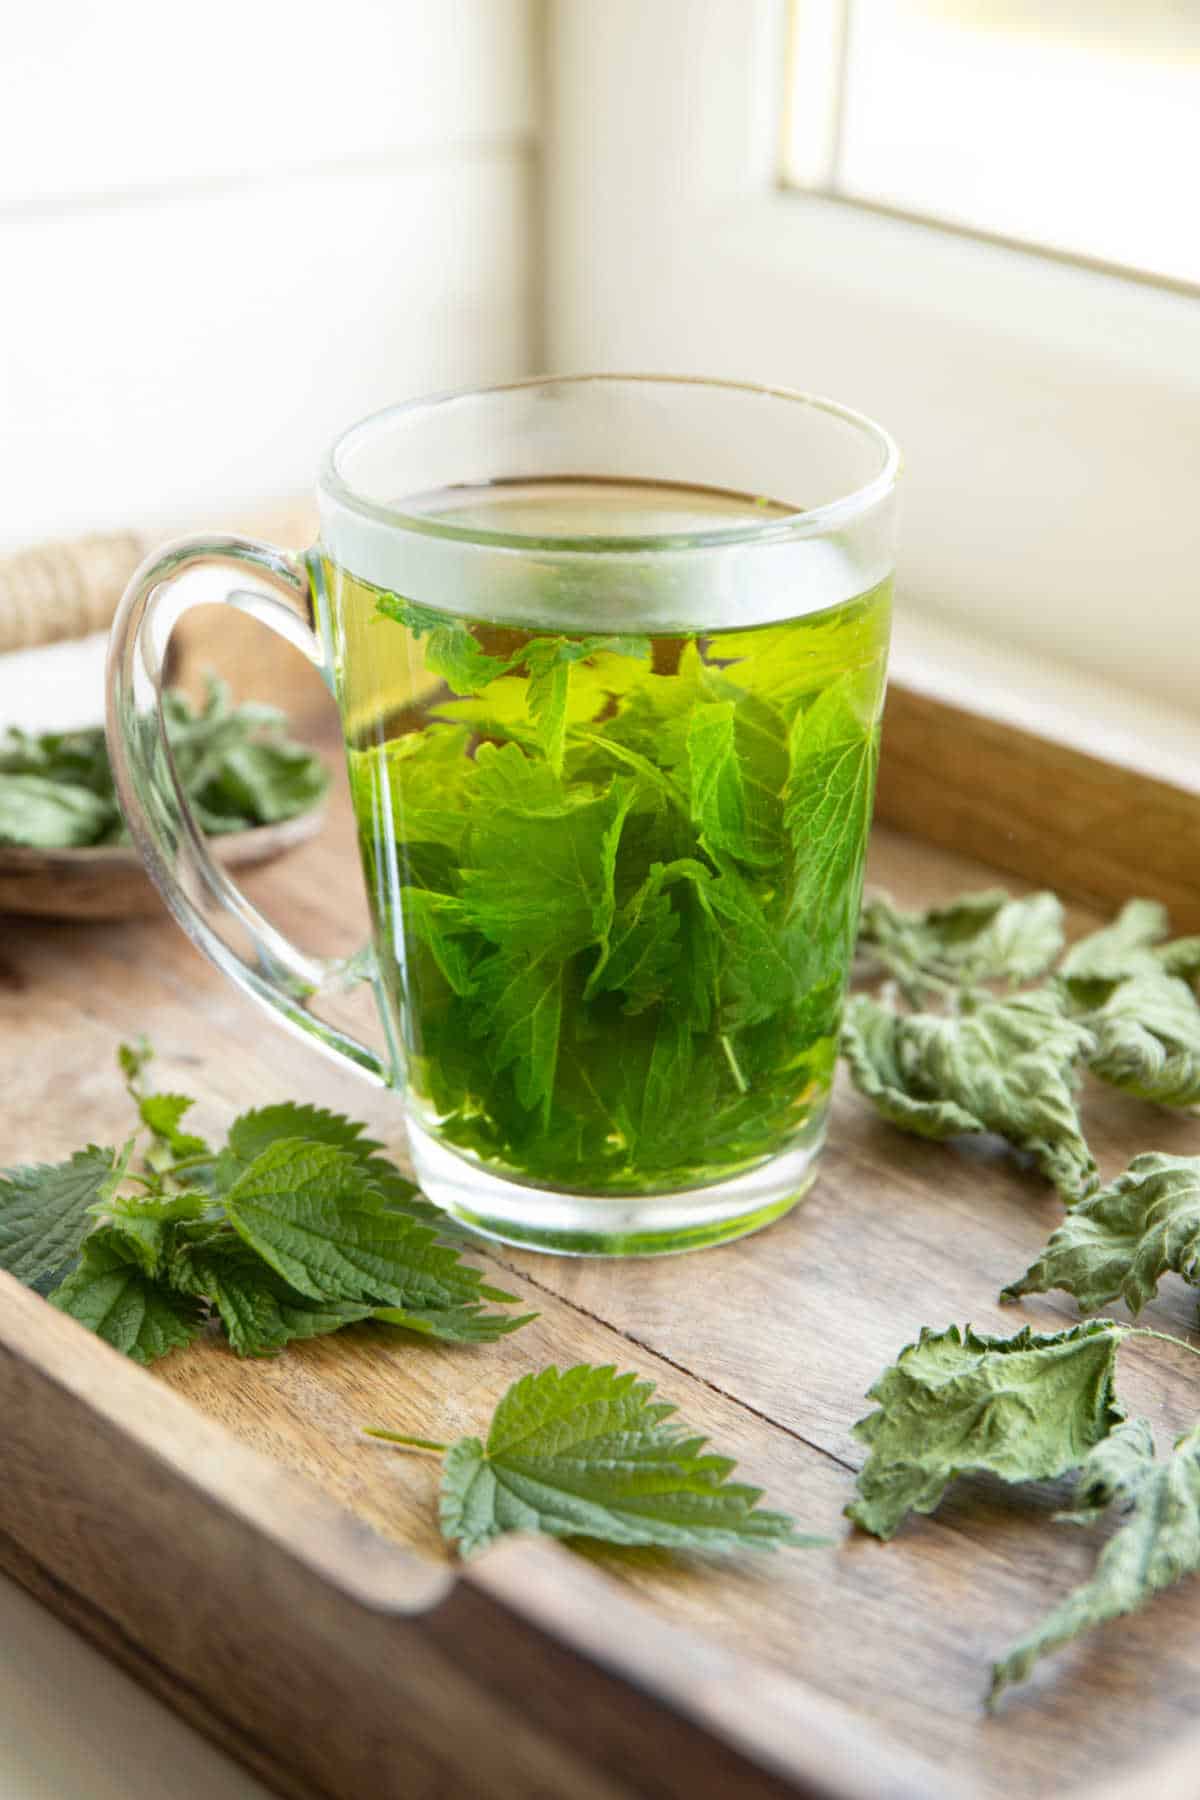 Nettle in tea for vegetables that start with n.